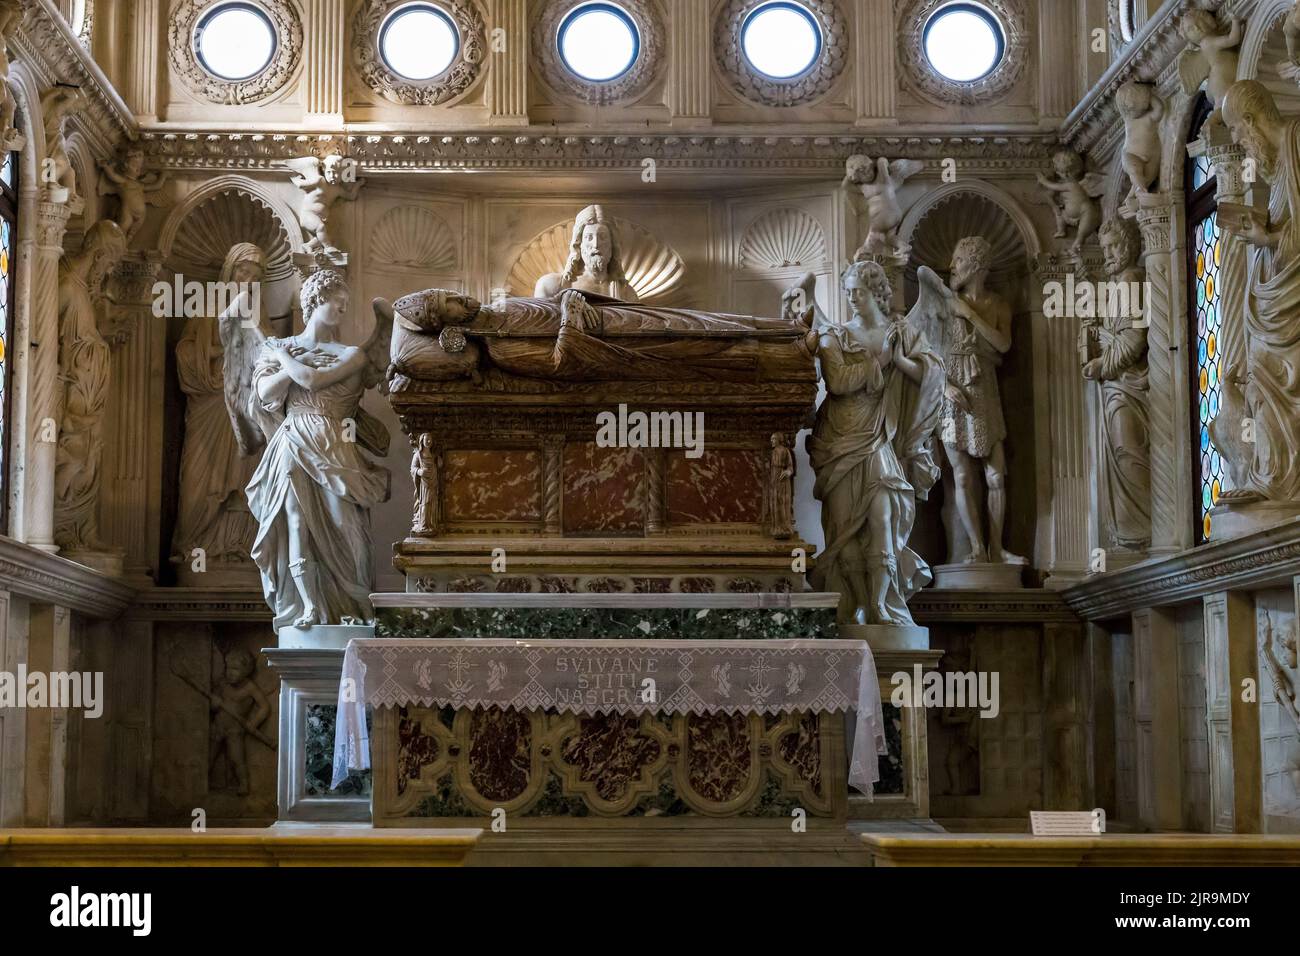 TROGIR, CROATIA - SEPTEMBER 11, 2017: This is the chapel and tomb of St. John of Trogir in the interior of the Cathedral of St. Lawrence. Stock Photo